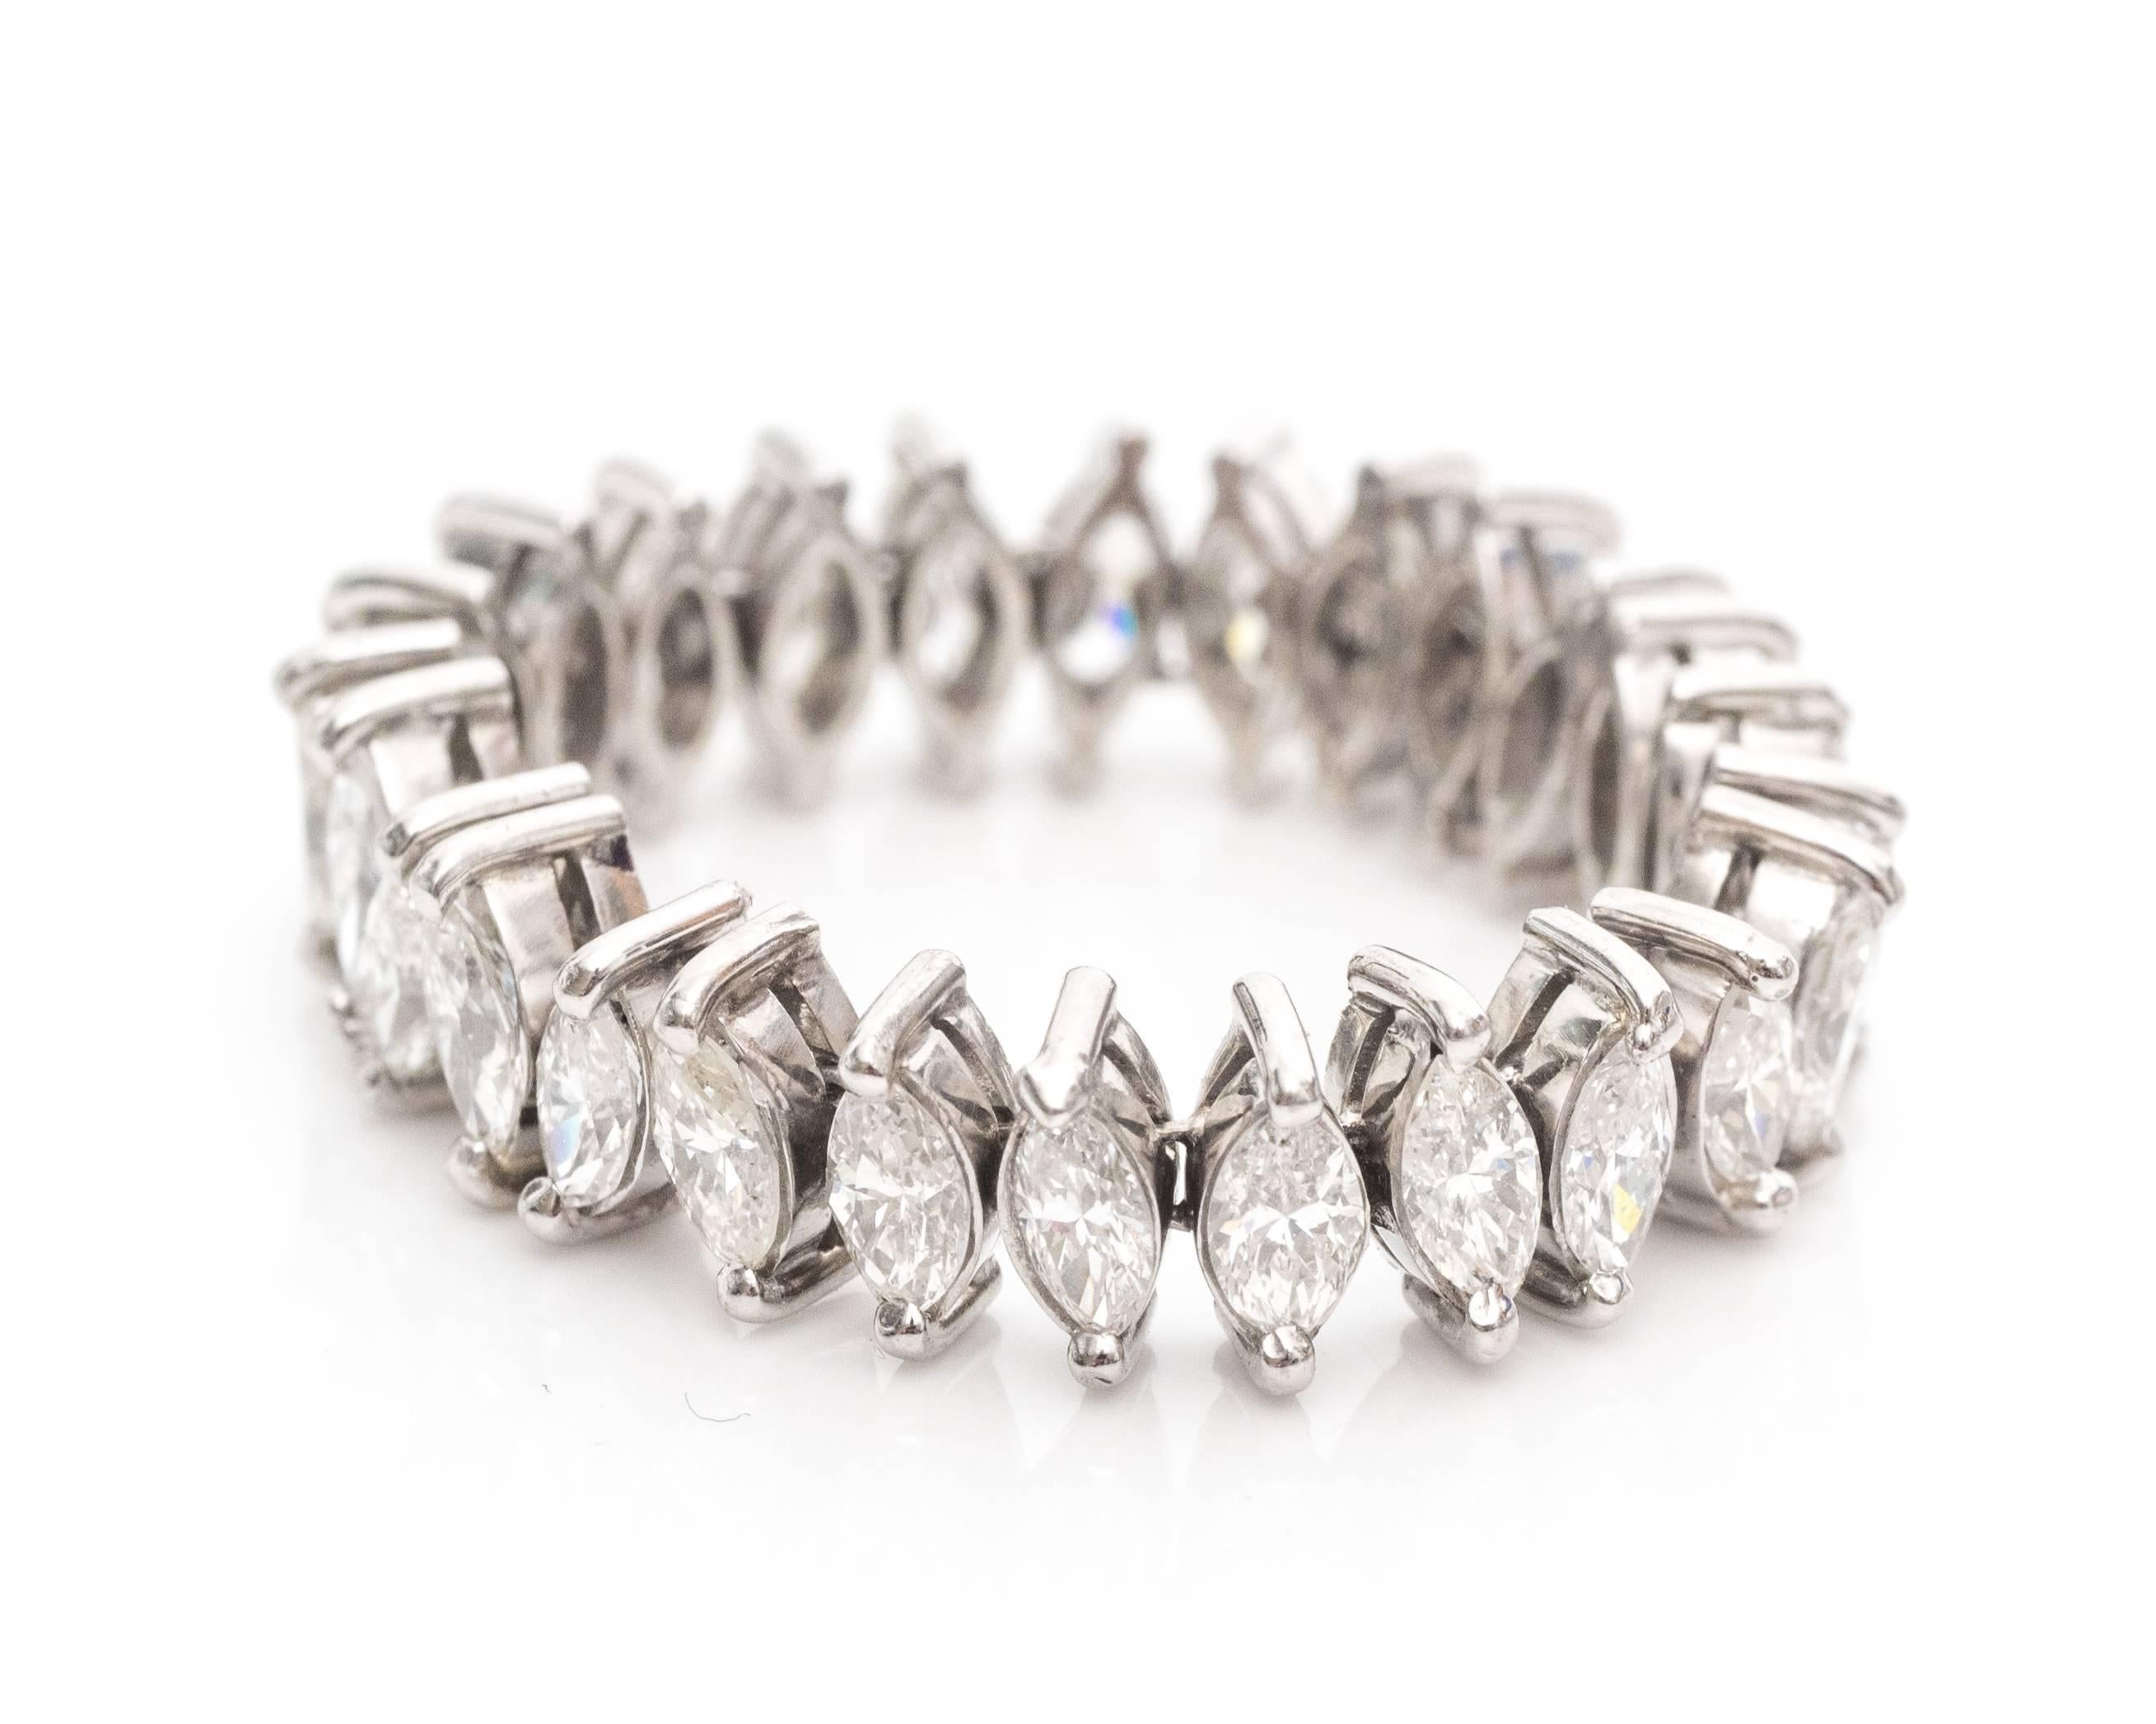 1950s Platinum 3 carats Marquise Diamond Eternity Band Ring

These beaming marquise shaped diamonds total to 3 carats. They are mounted in two-prong frames that protect the tip of each cut. The entire frame is made of platinum.

This linked ring is